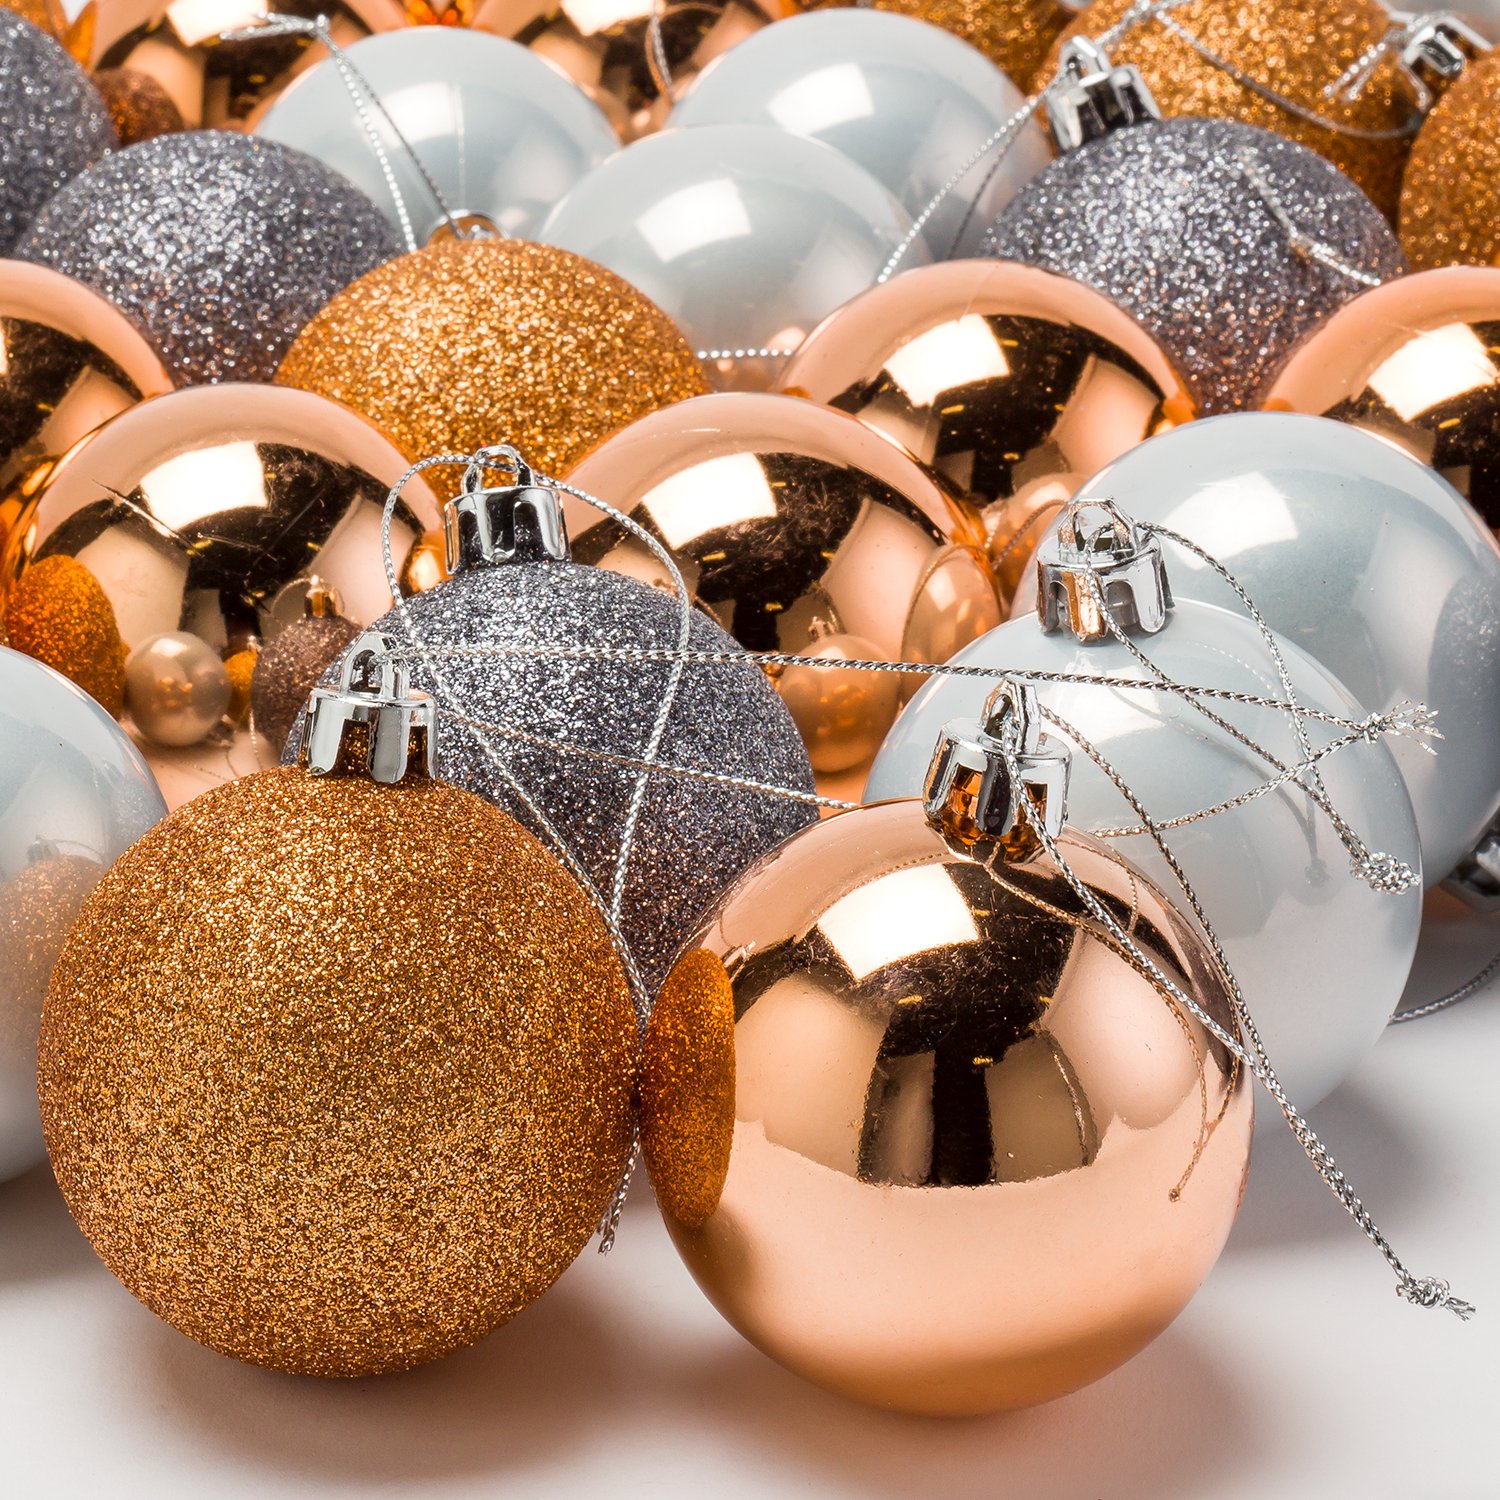 Argos Home 48 Pack Christmas Noir Baubles - Copper and Grey